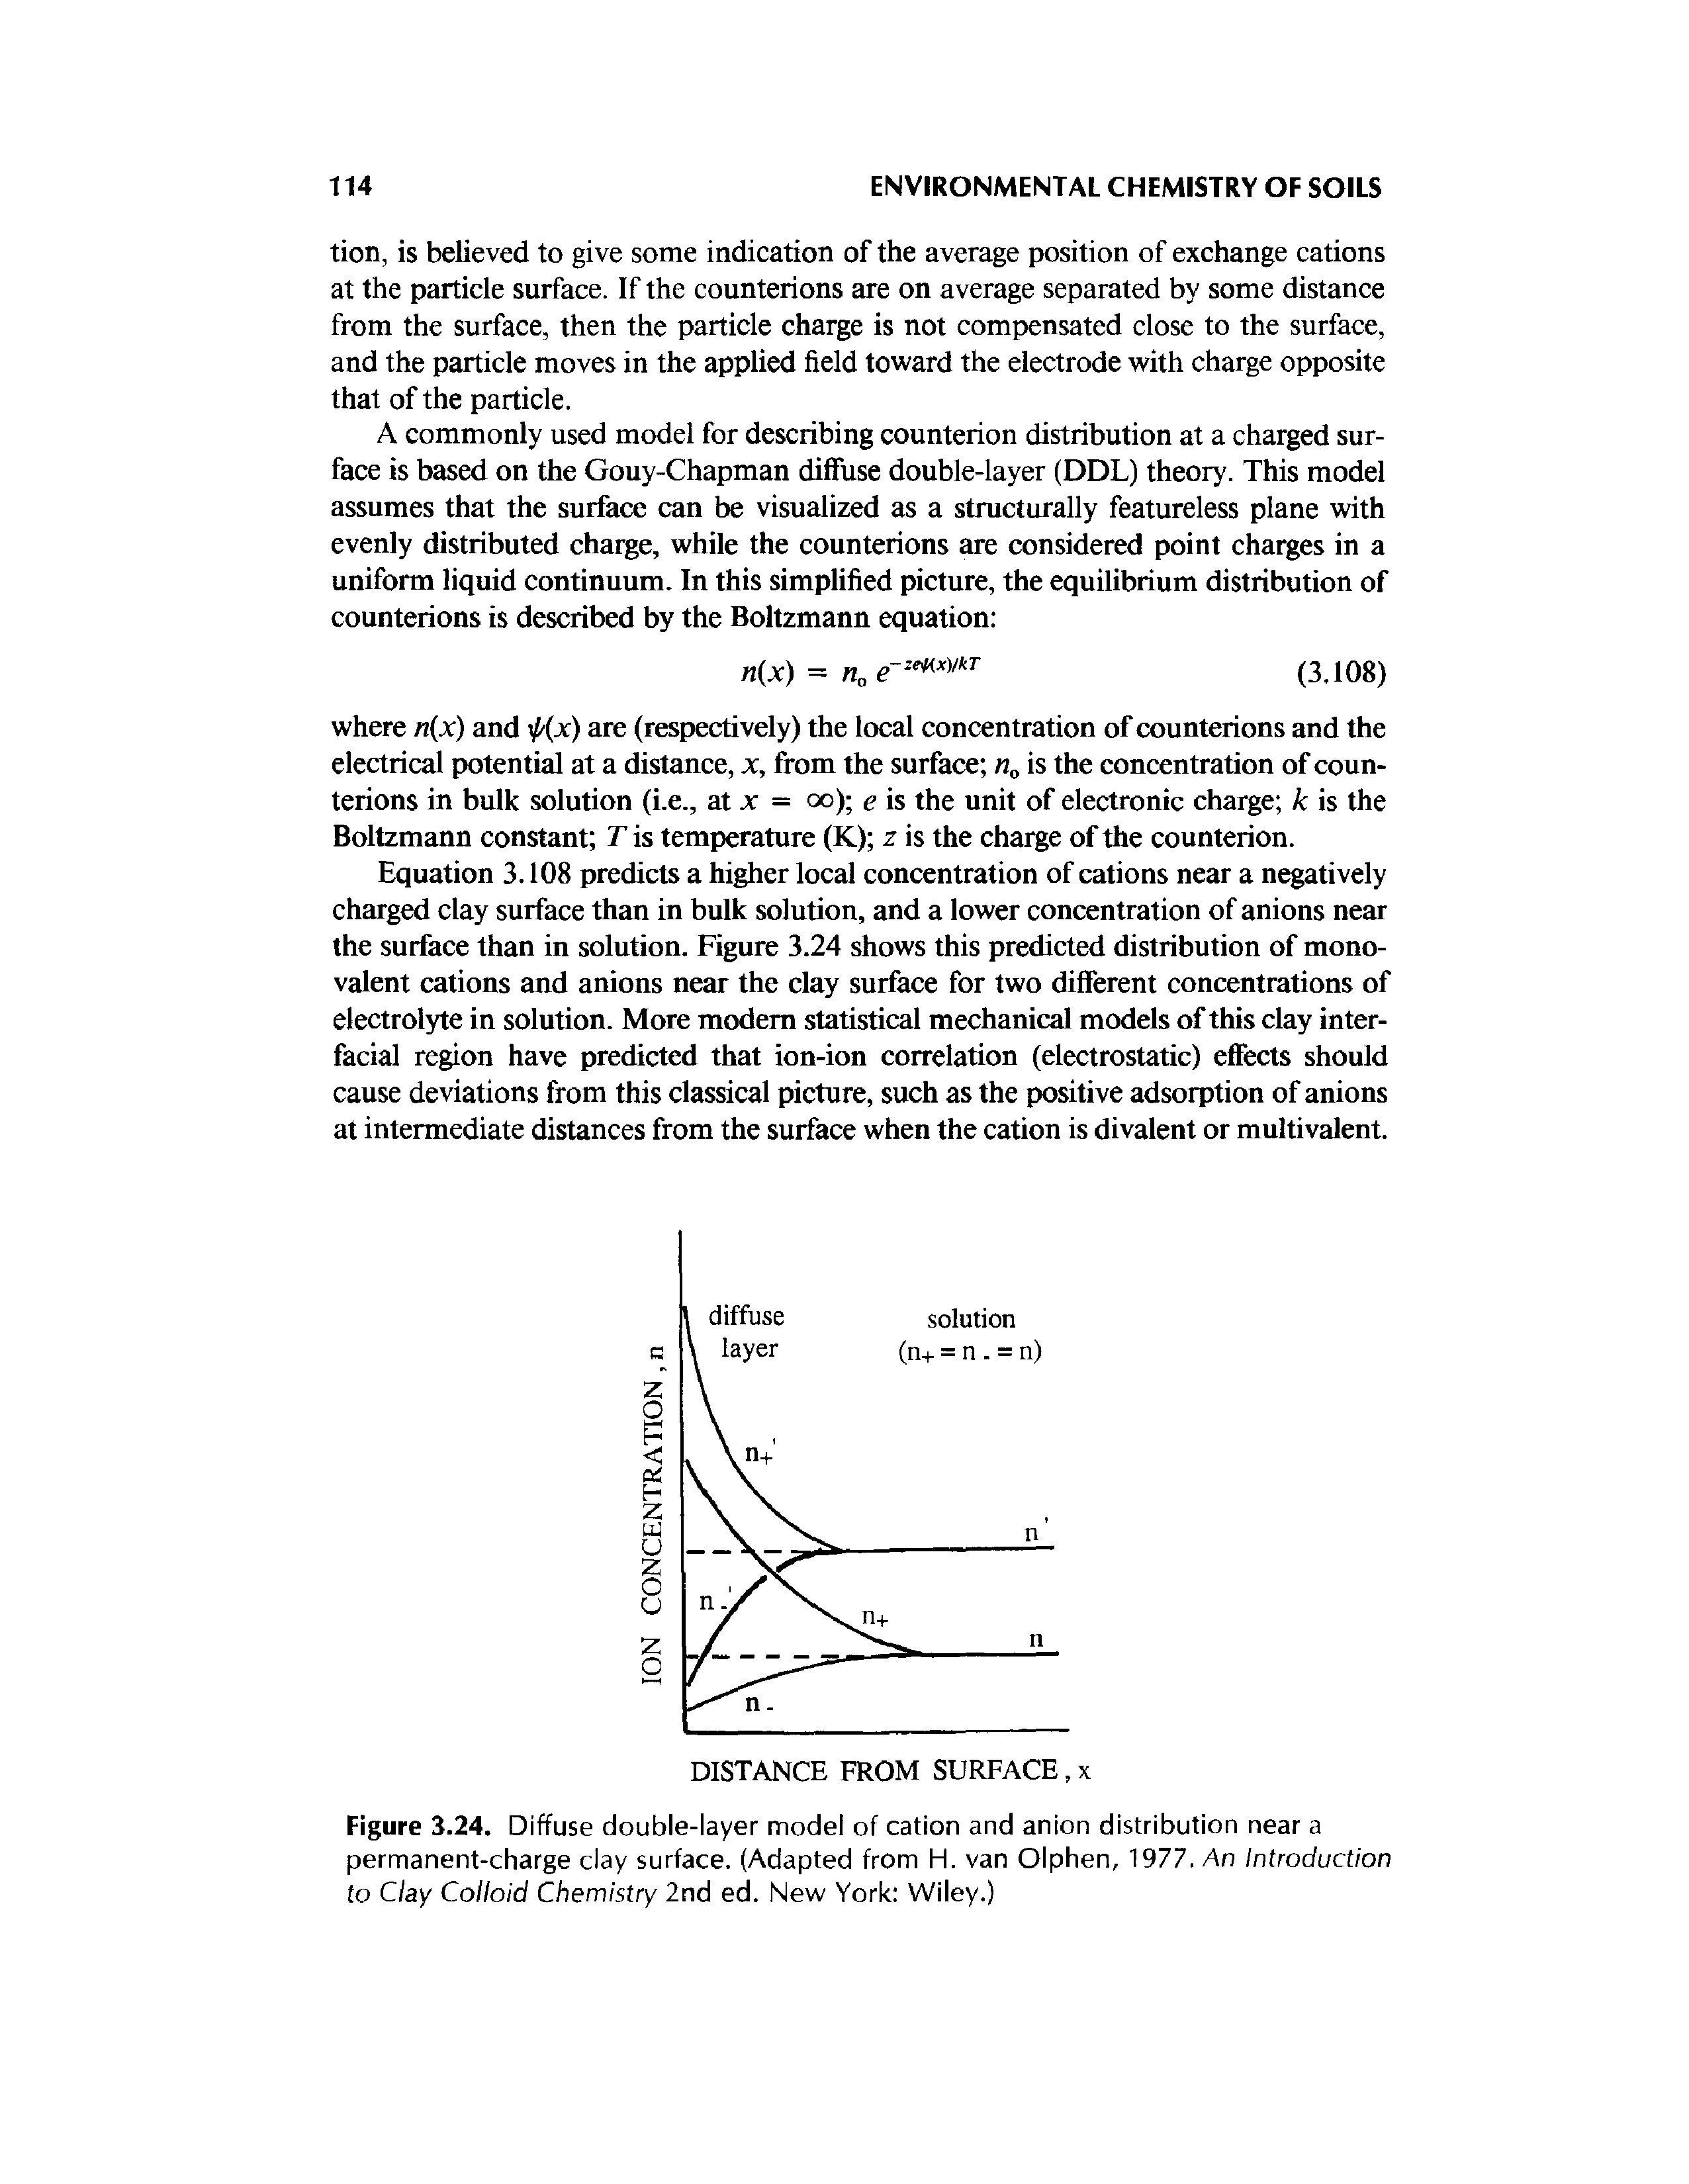 Figure 3.24, Diffuse double-layer model of cation and anion distribution near a permanent-charge clay surface. (Adapted from H. van Olphen, 1977. An Introduction to Clay Colloid Chemistry 2nd ed. New York Wiley.)...